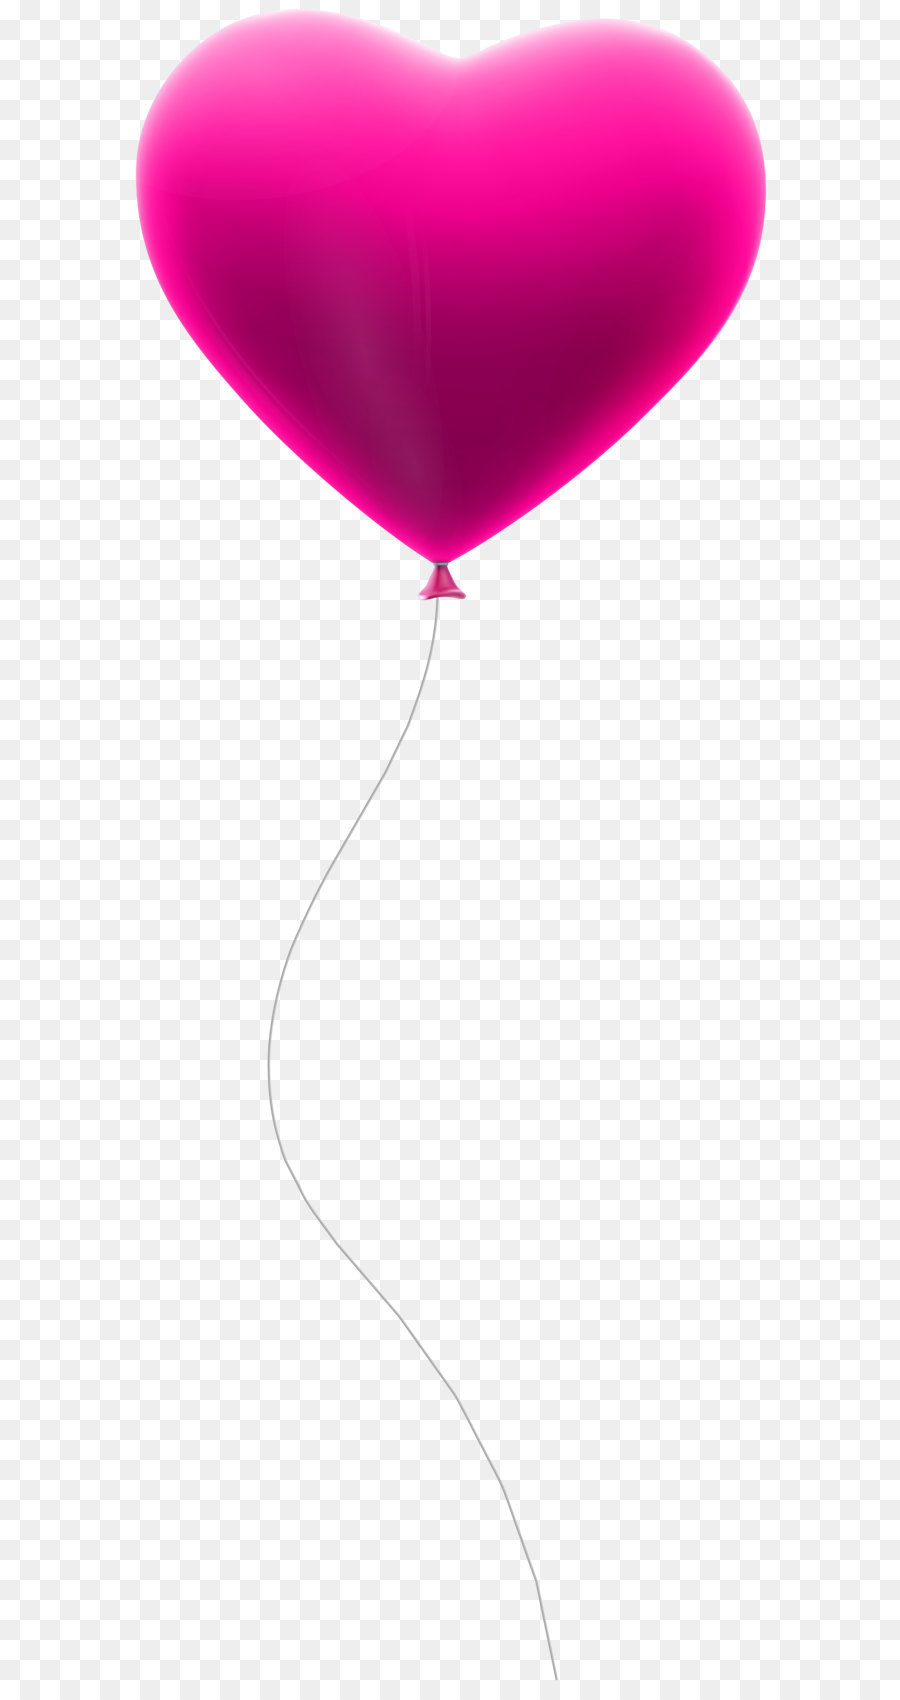 Clip art Balloon Image Openclipart Portable Network Graphics - red ...